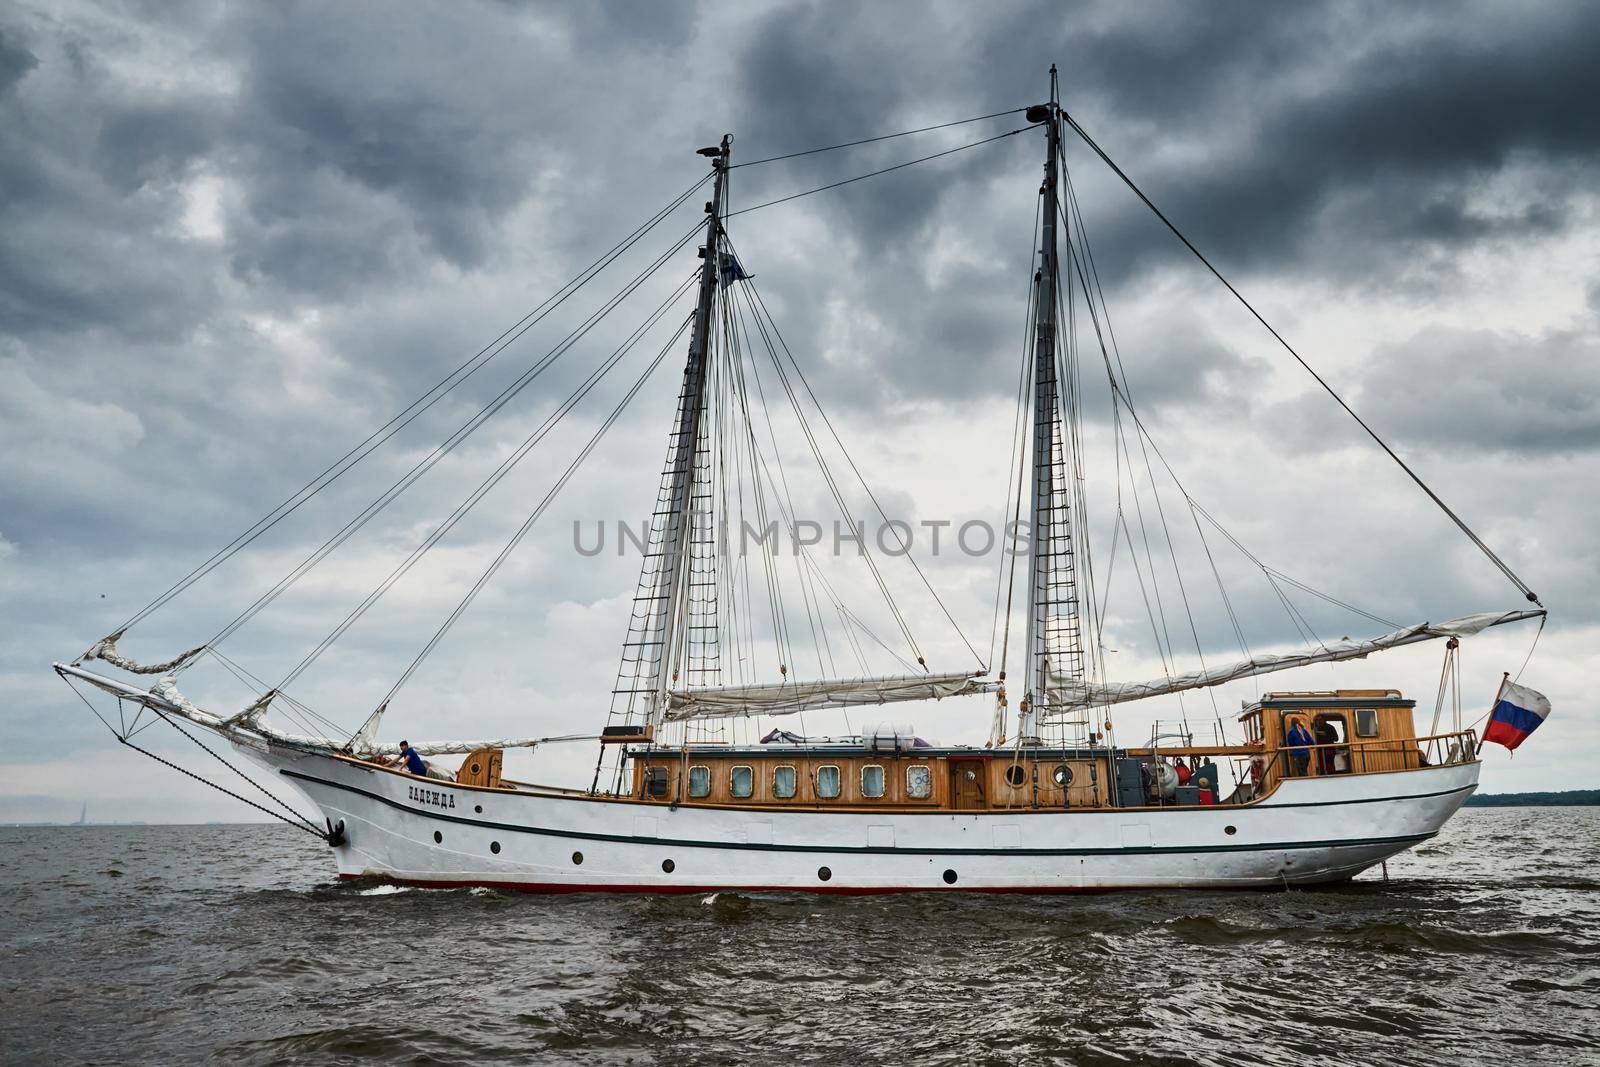 Russia, St.Petersburg, 31 August 2020: Antique sailing frigate of white color to the sea, the lowering storm sky, sails are lowered, masts and ropes by vladimirdrozdin